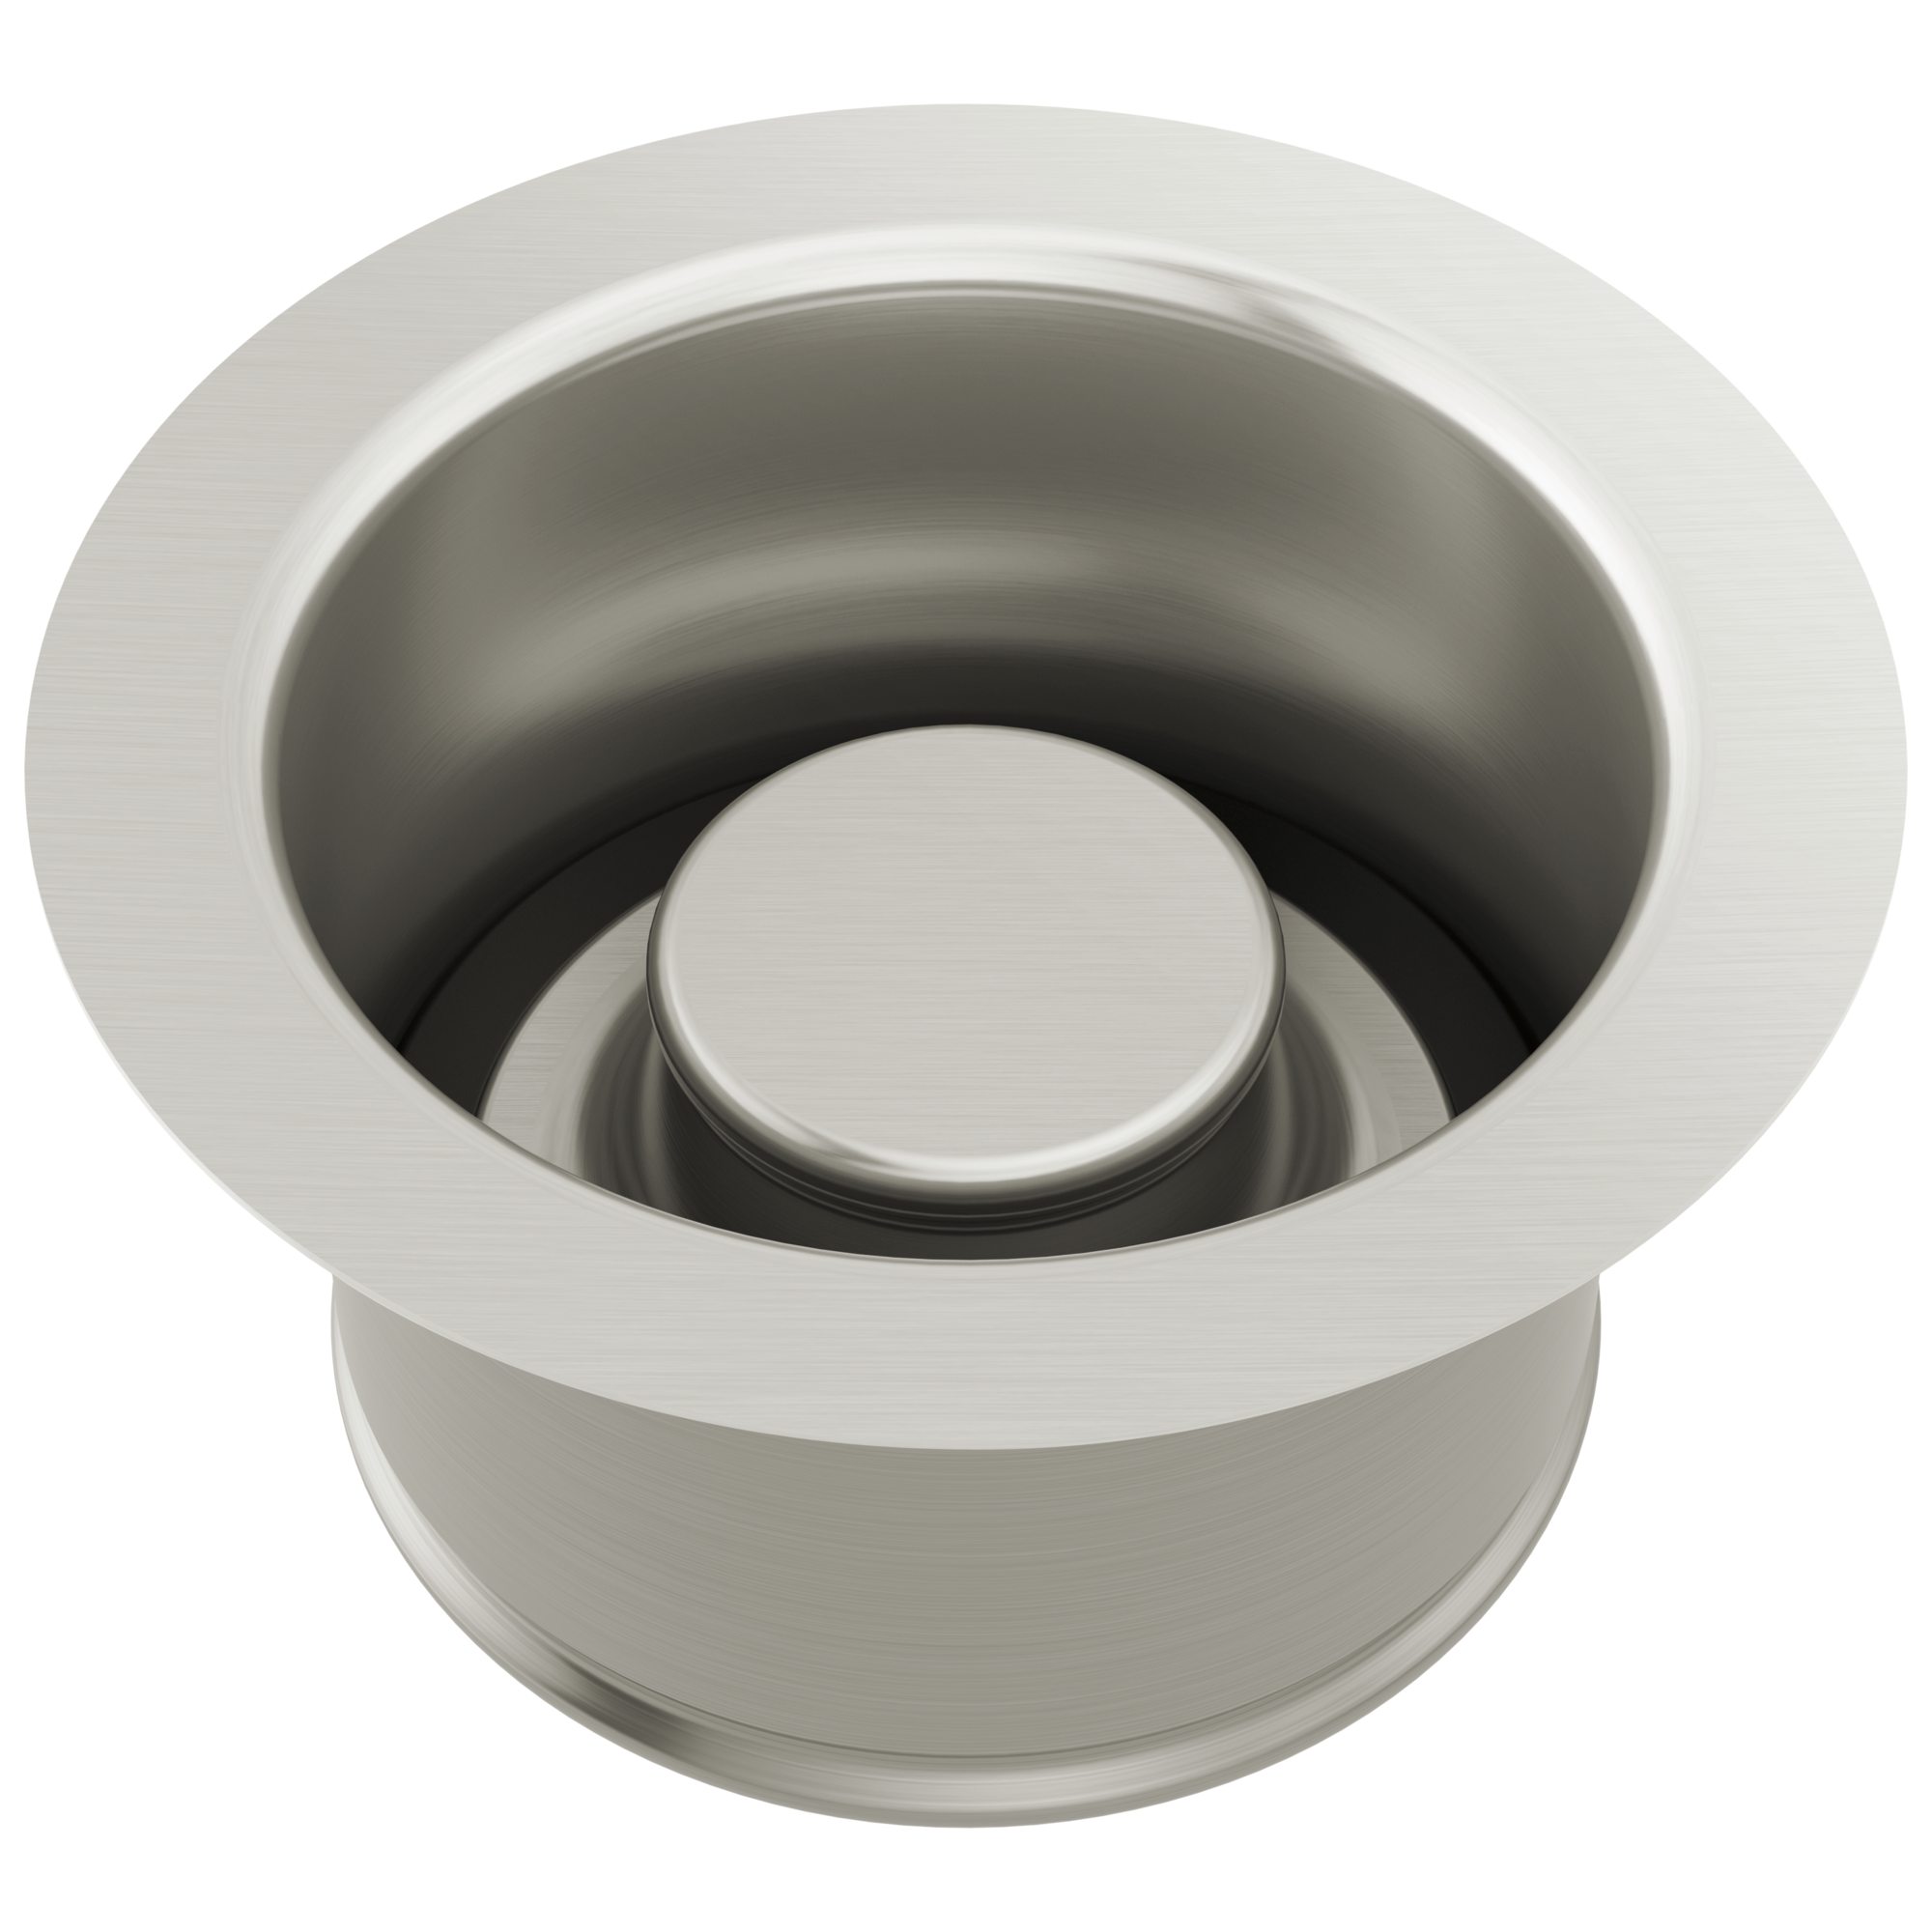 Brizo Other: Kitchen Sink Disposal Flange with Stopper